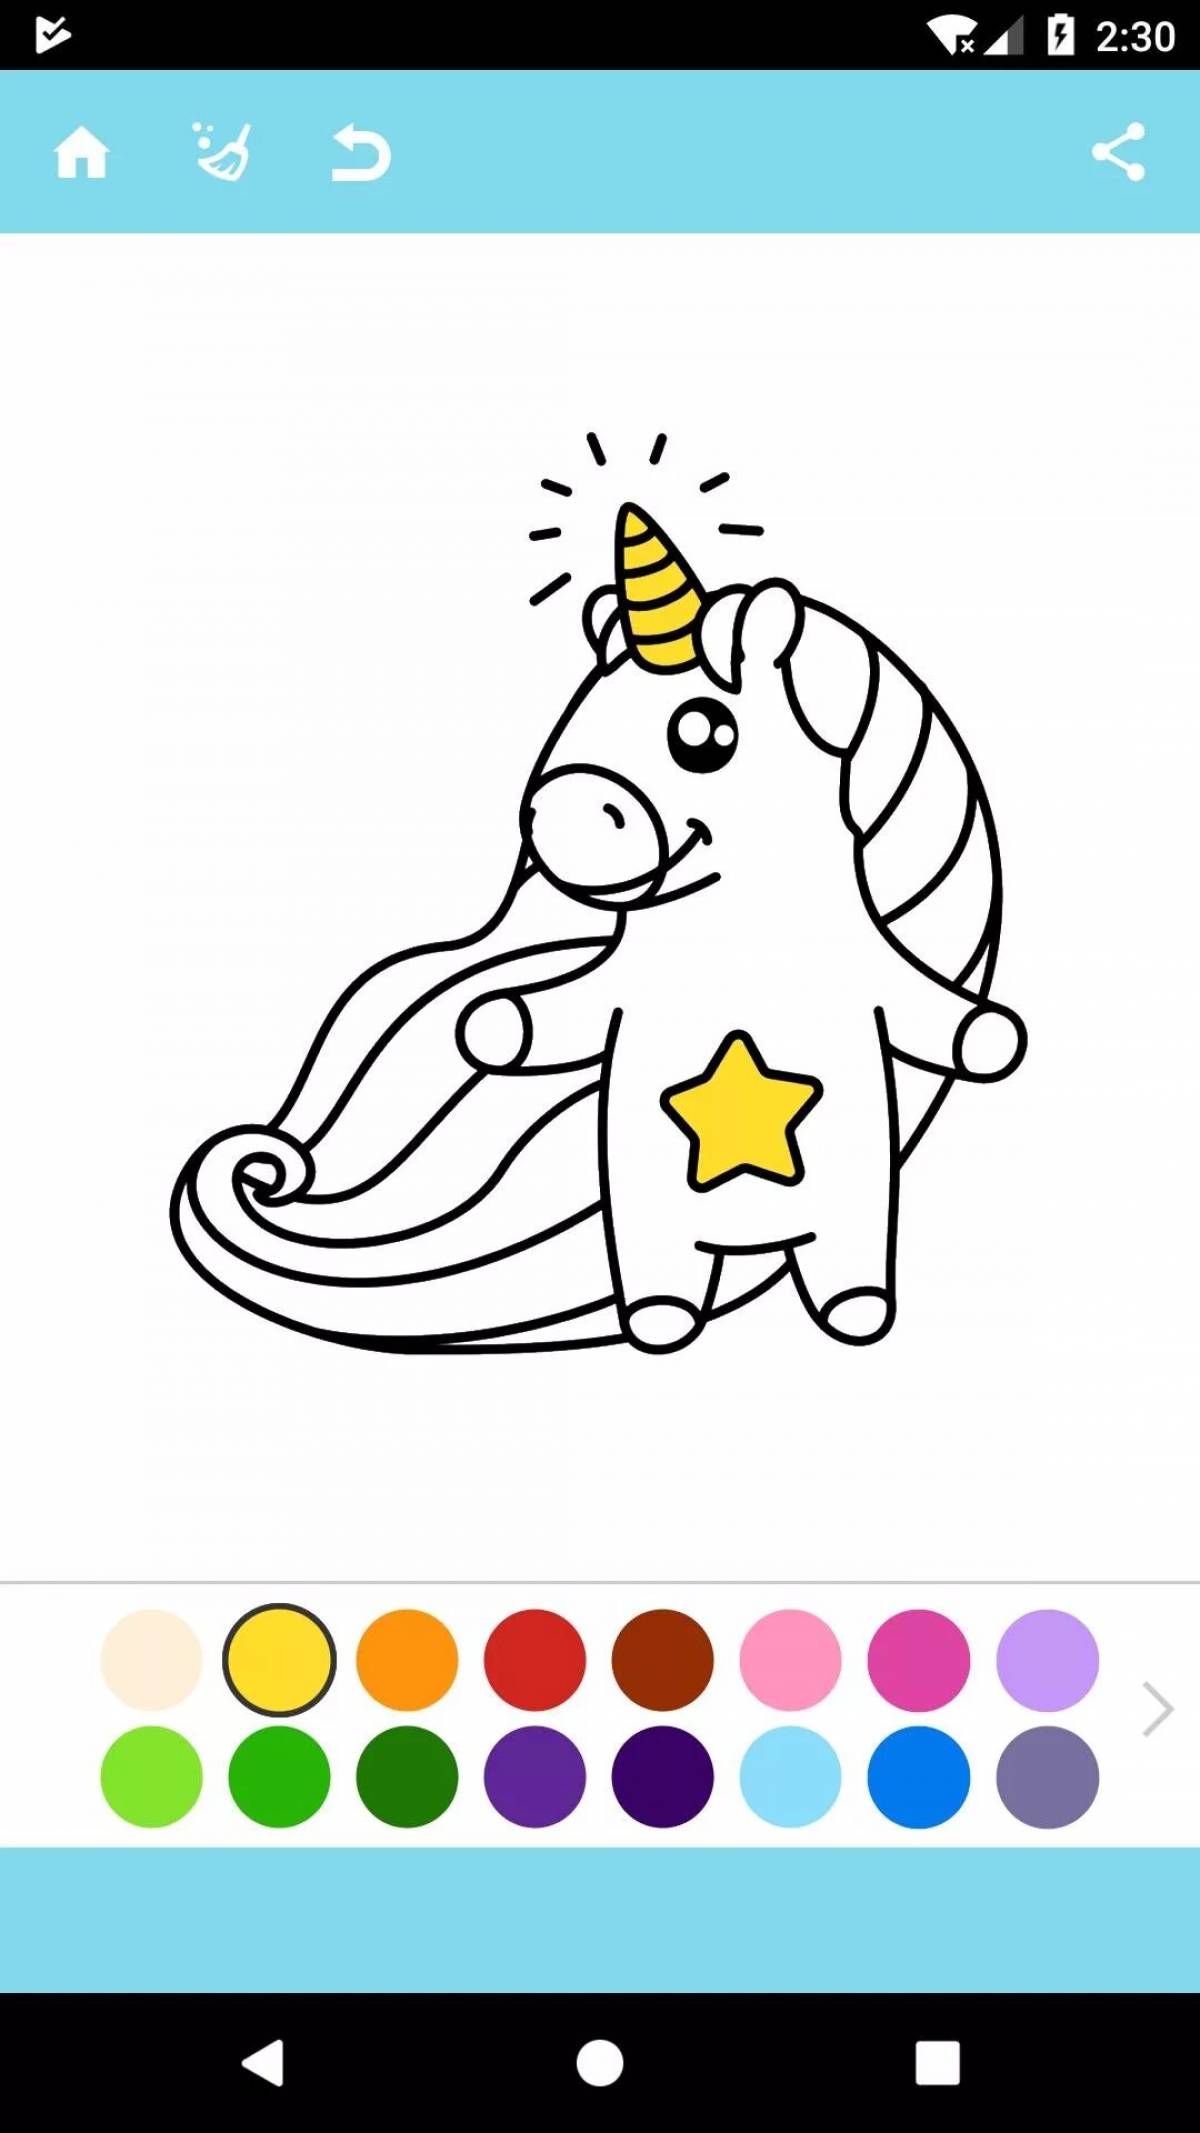 Exciting unicorn coloring pages